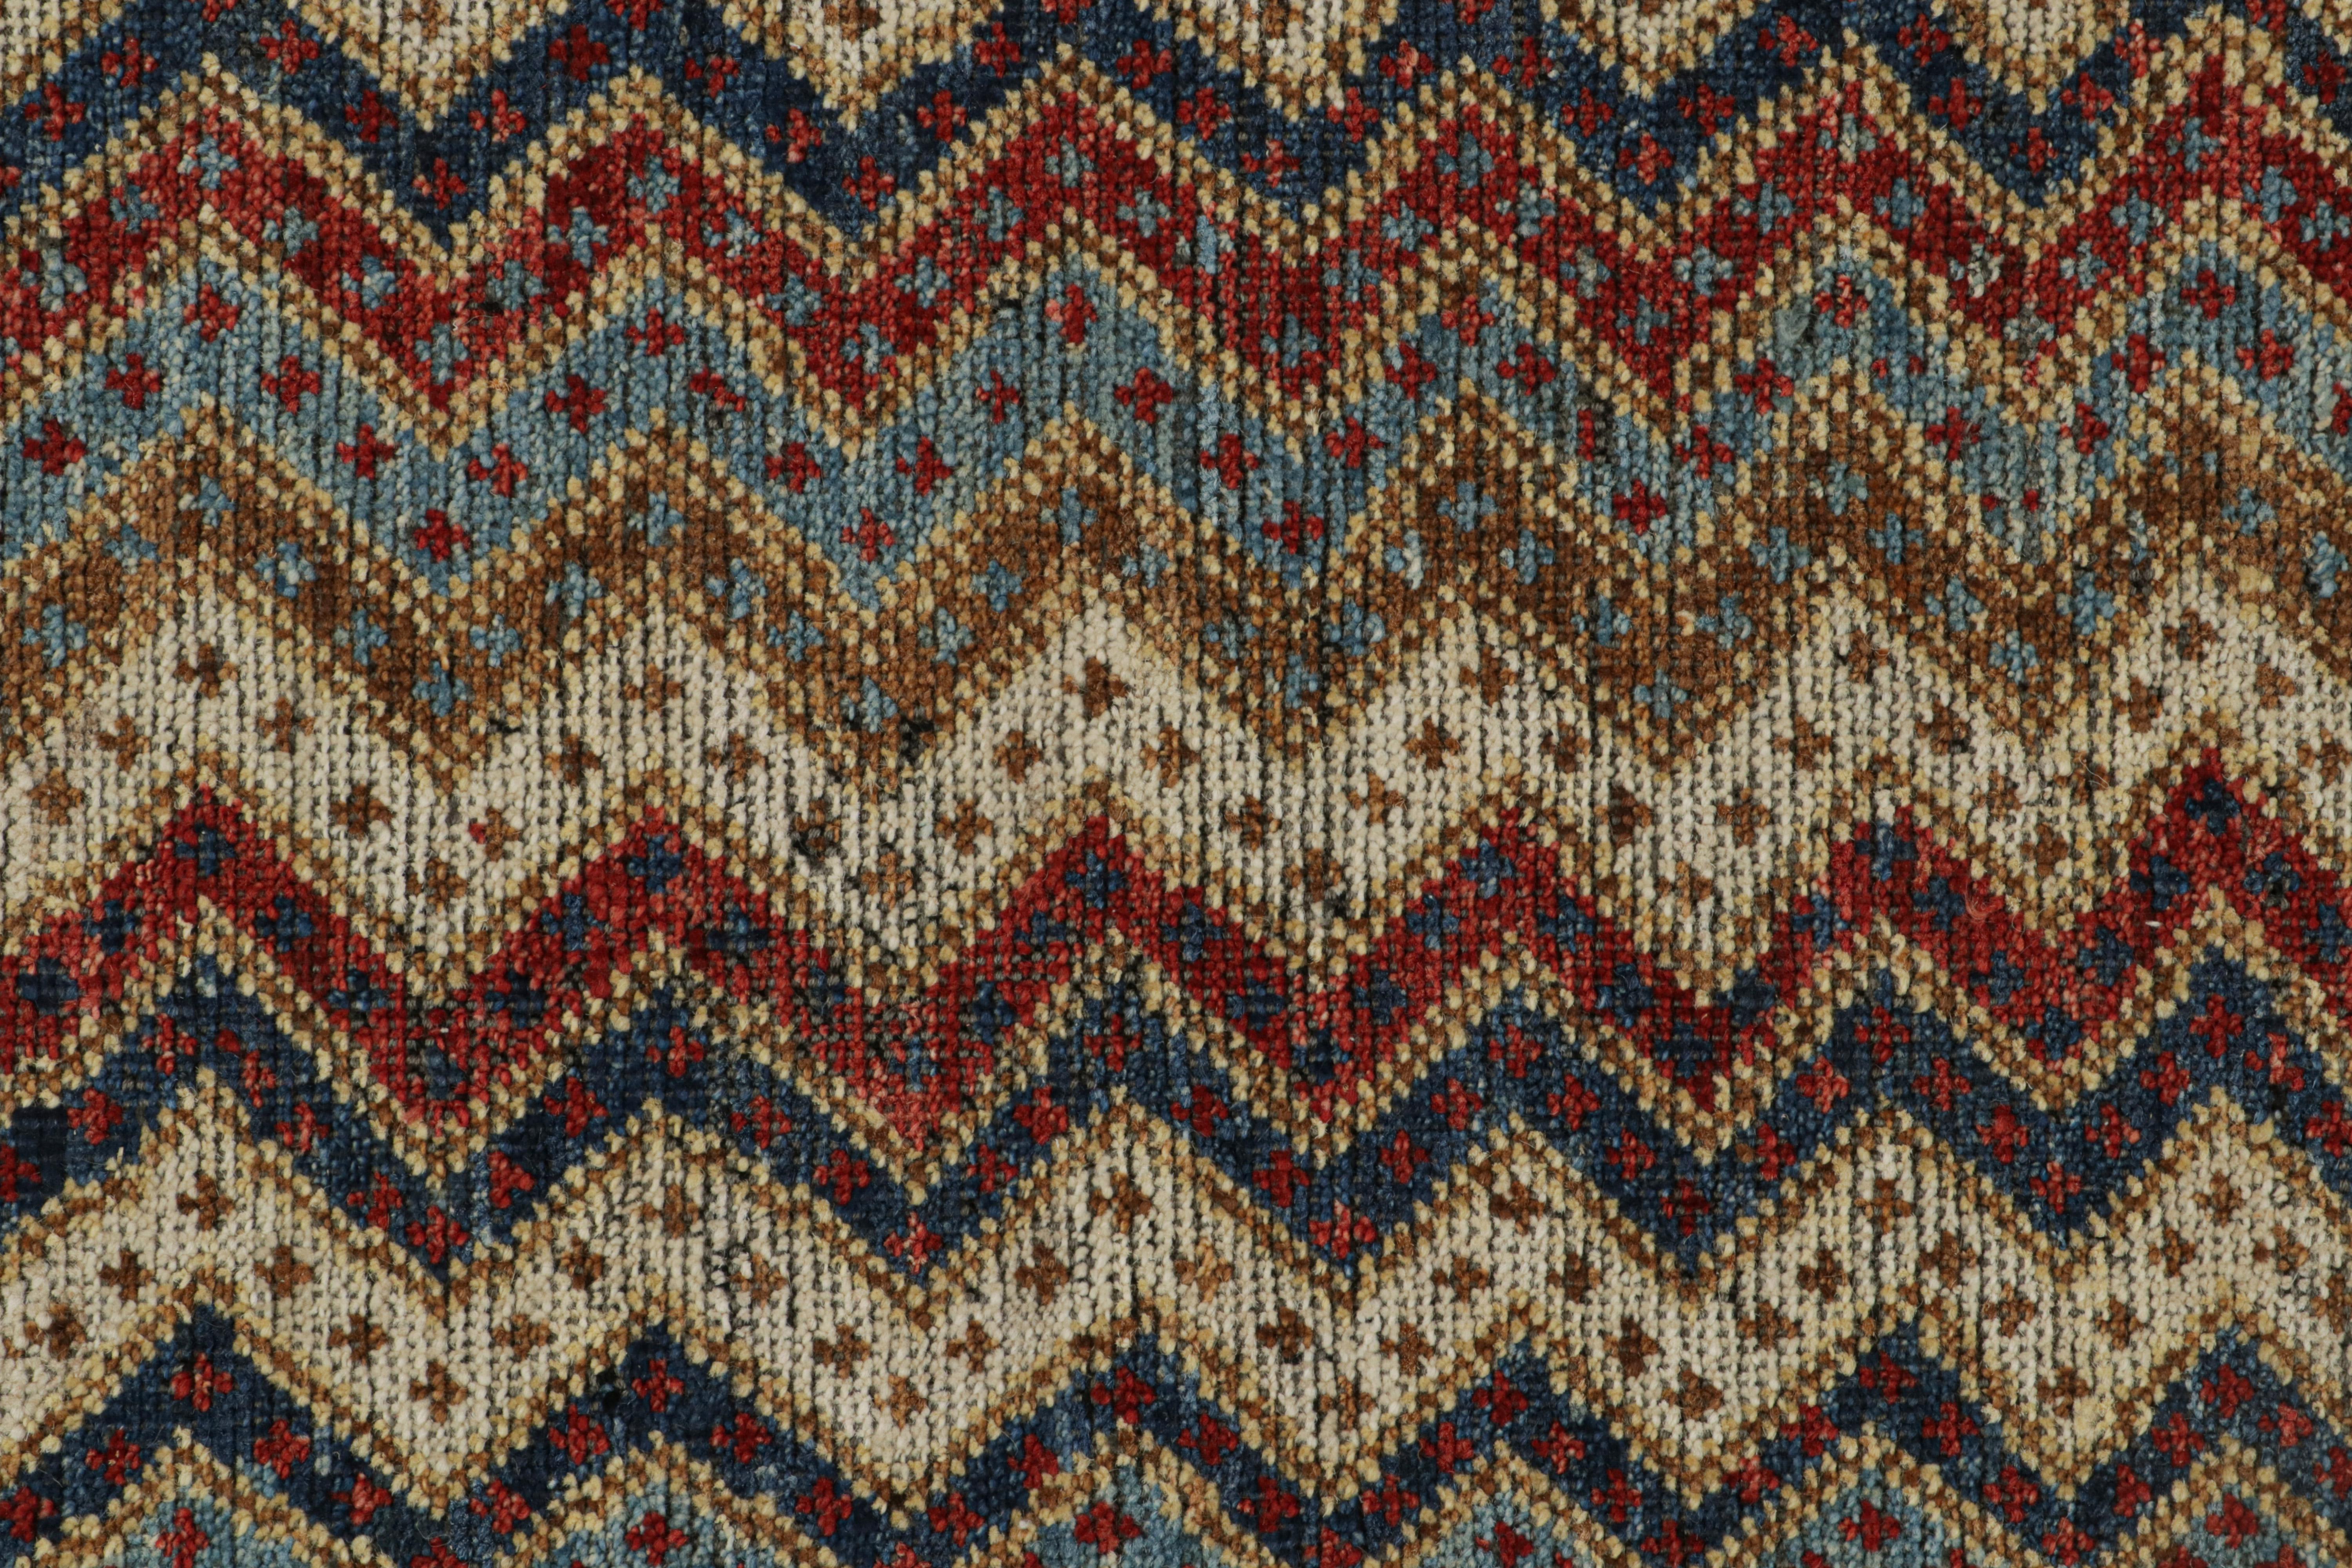 Contemporary Rug & Kilim’s Antique Tribal Style rug in Red, Blue, Brown & White Patterns For Sale